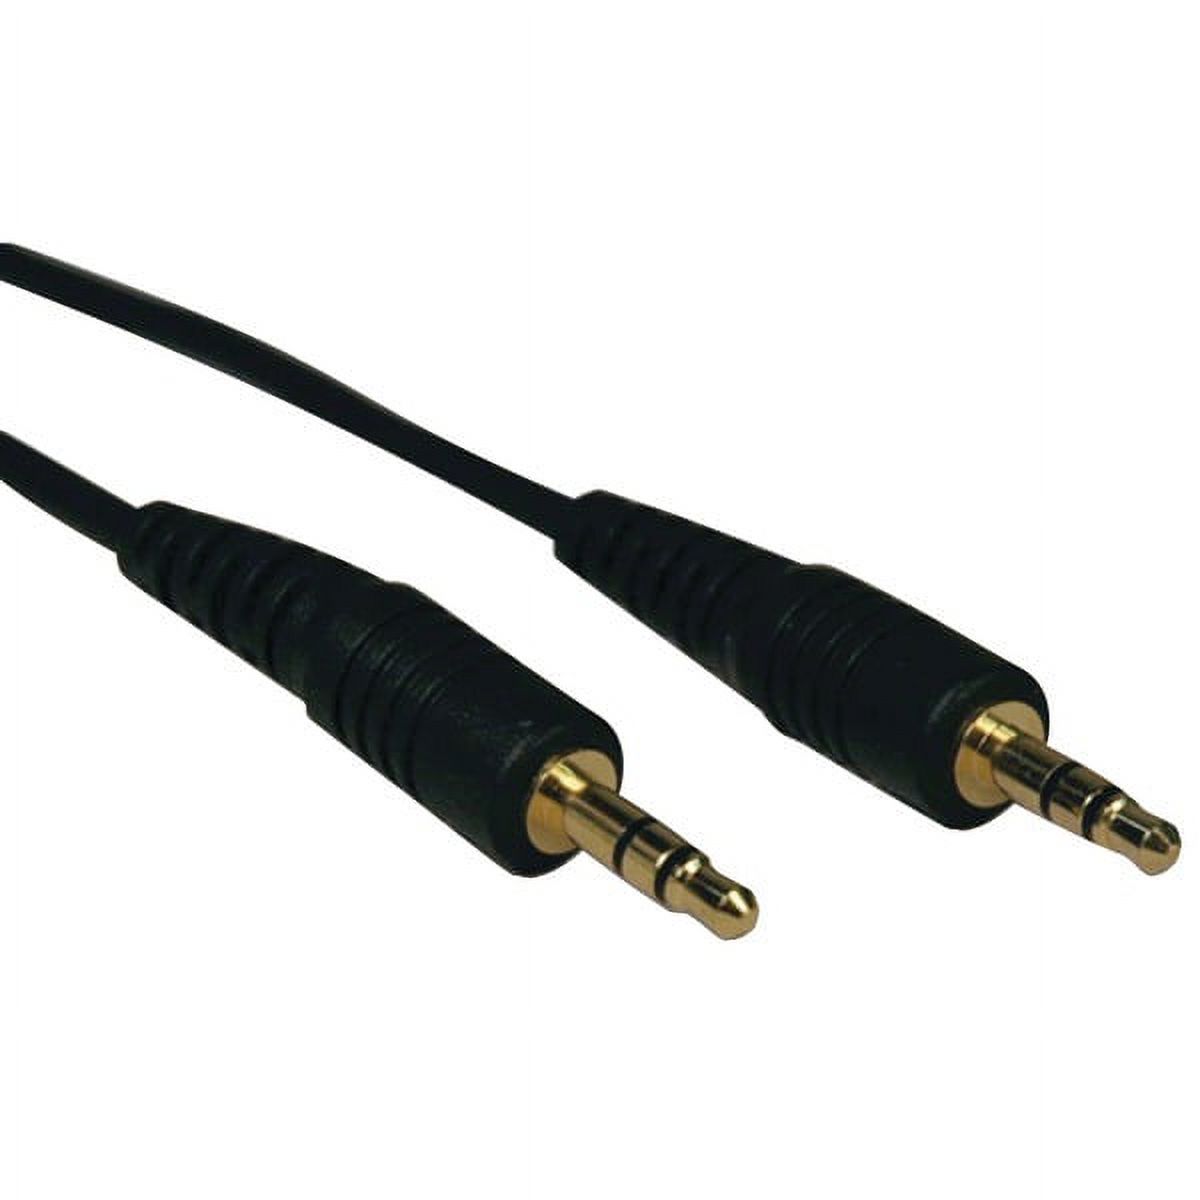 Tripp Lite® 3.5mm Stereo Dubbing Cord (6 ft) - image 1 of 1